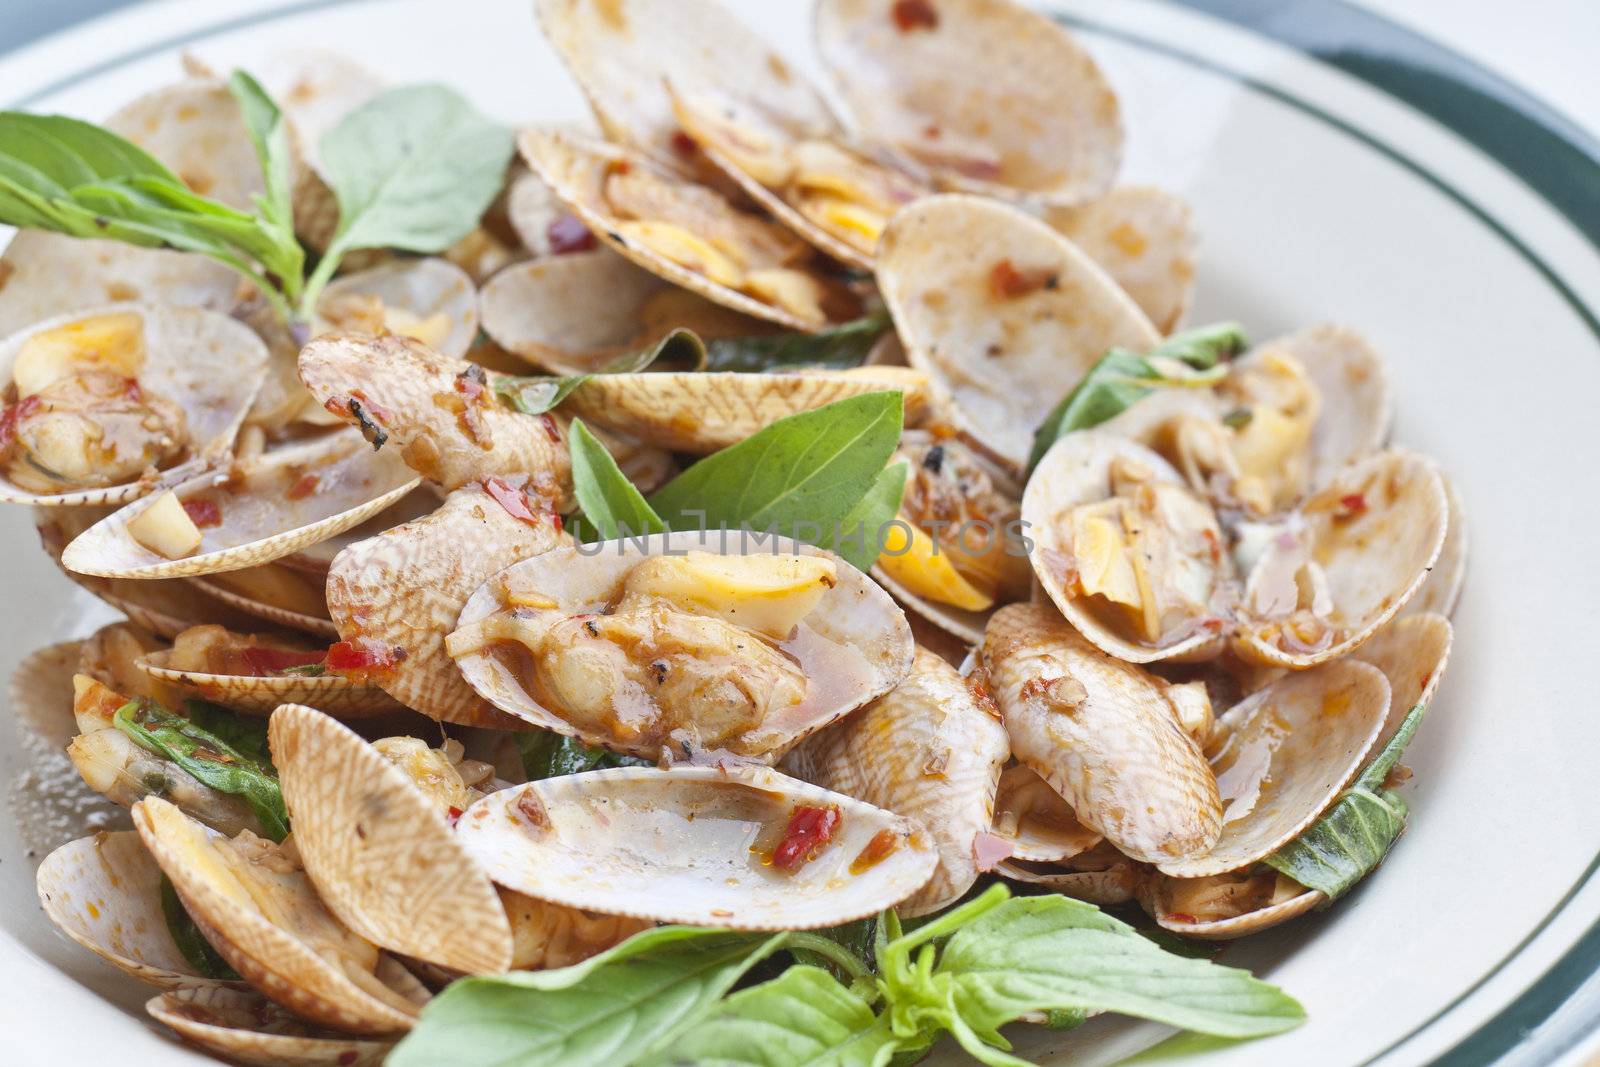 clams, seafood, used to make food such as soup or fried.